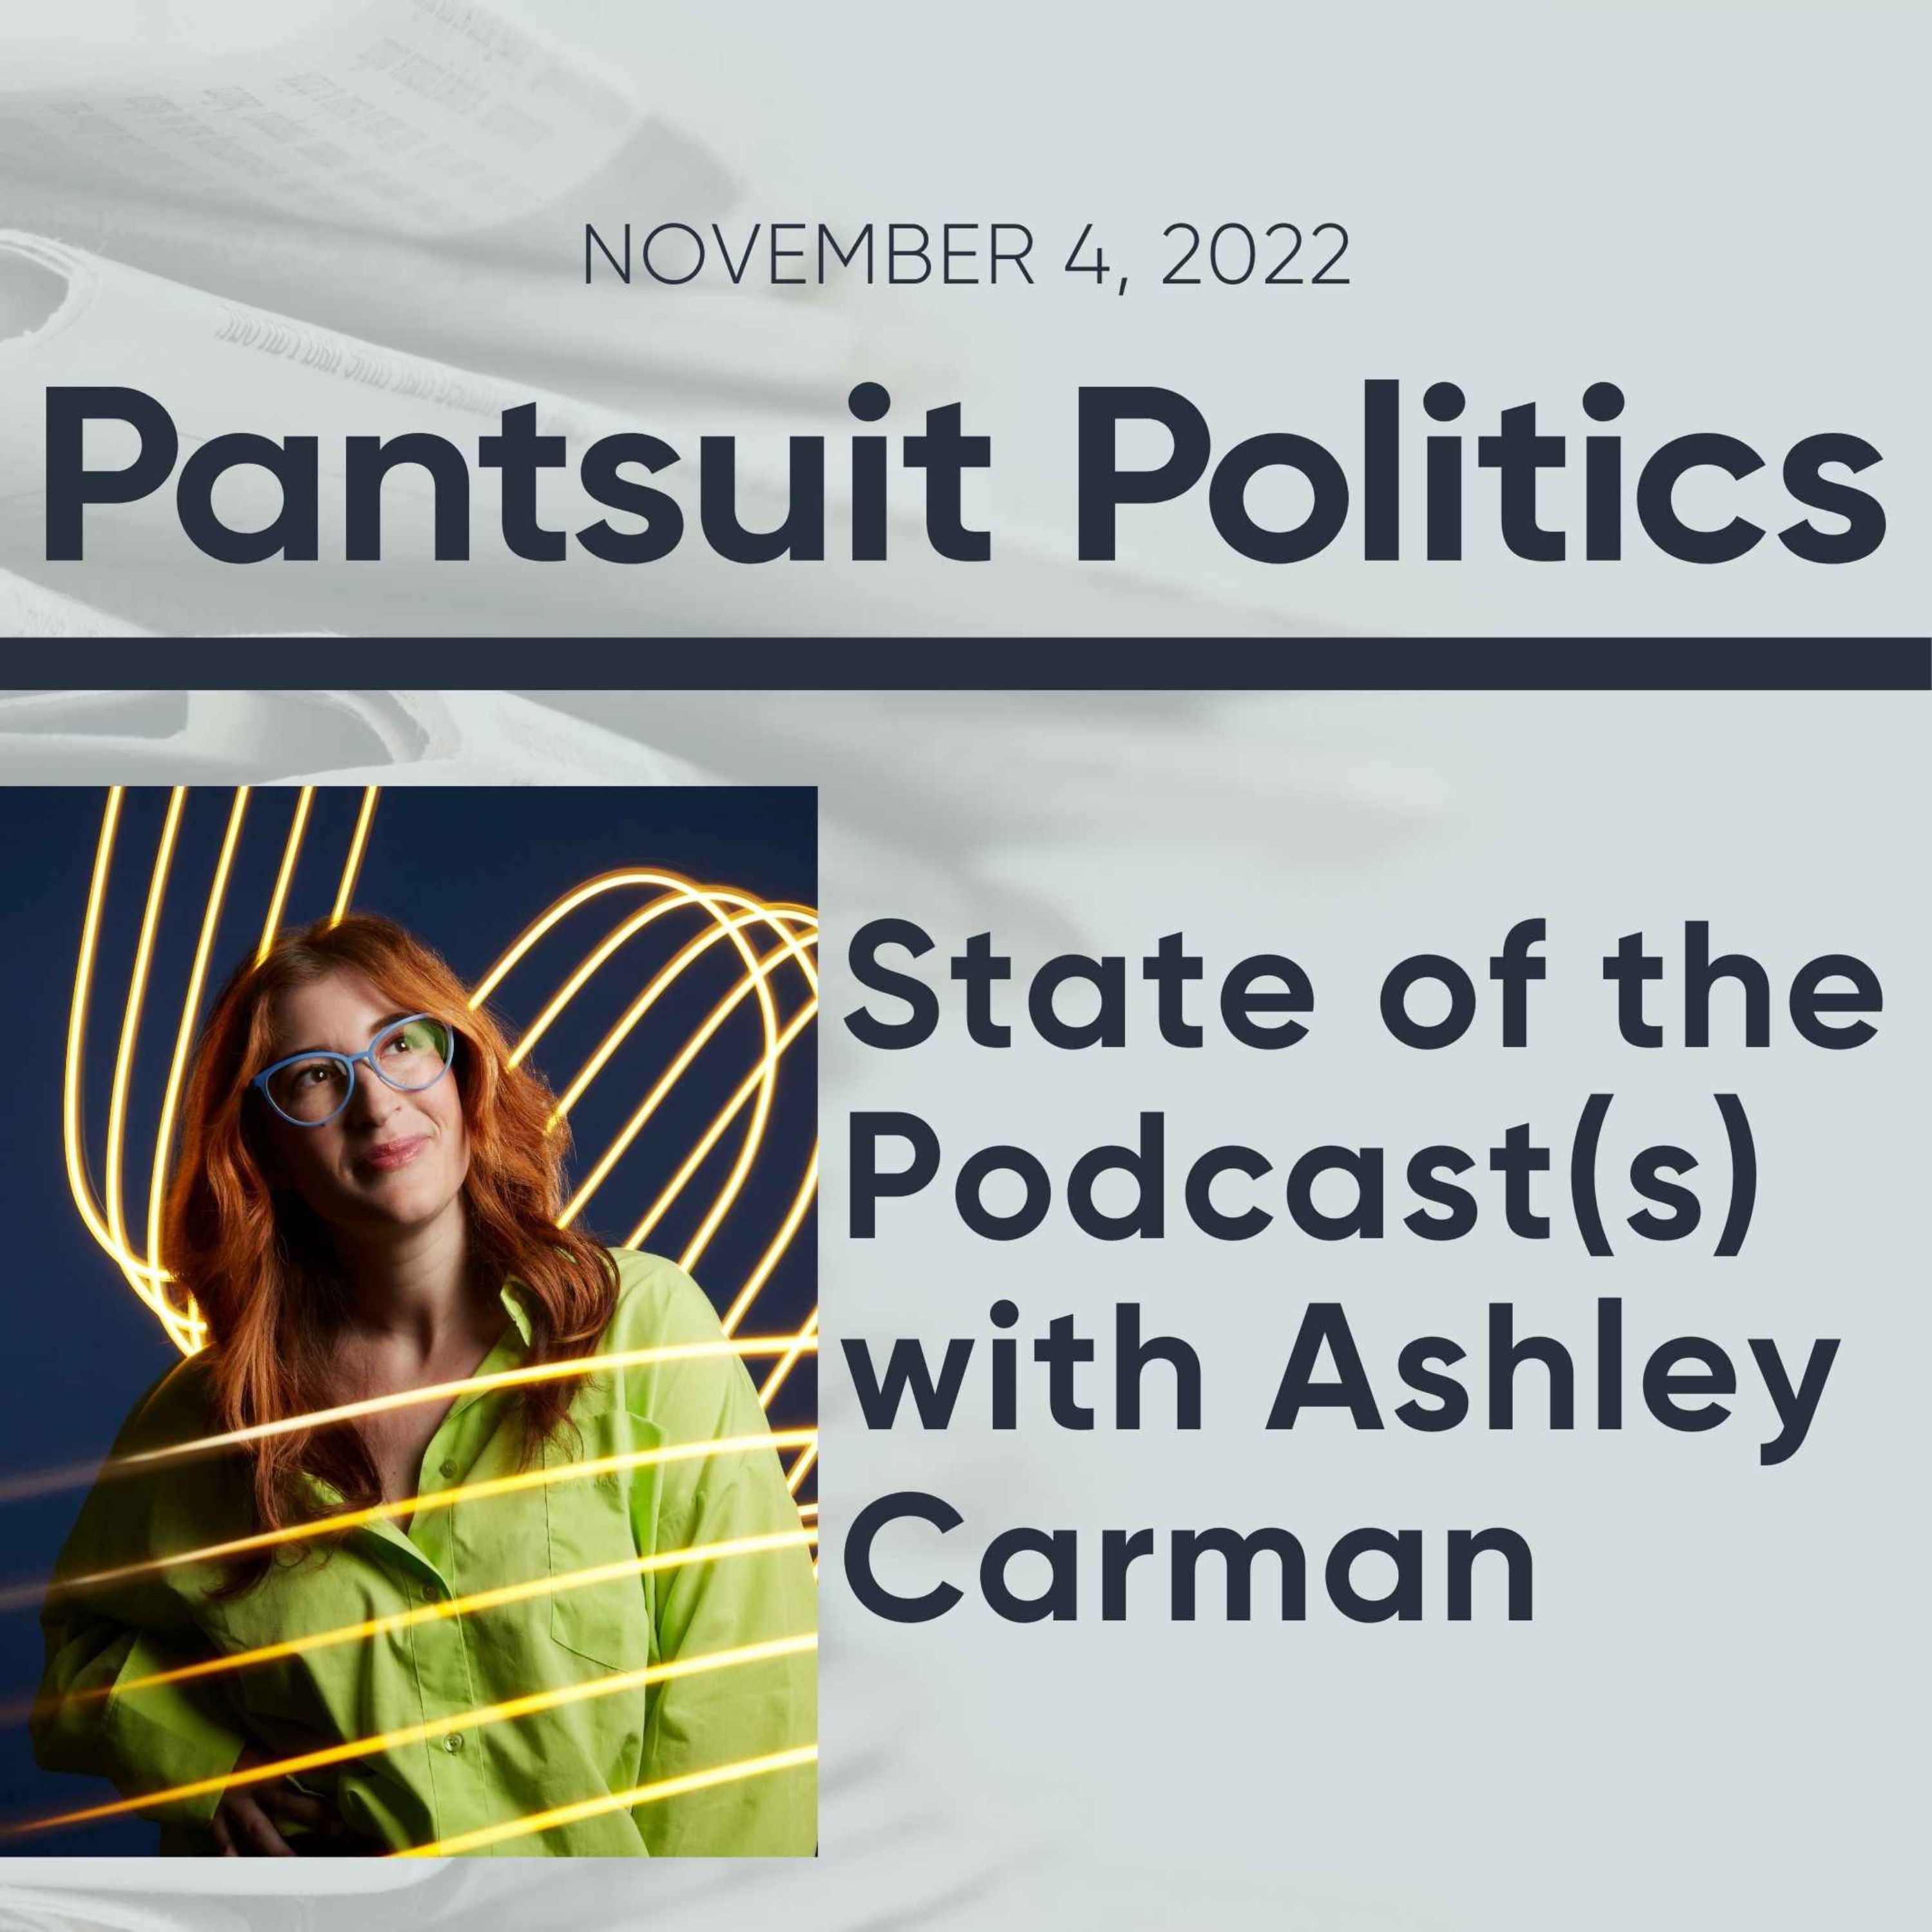 State of the Podcast(s) with Ashley Carman